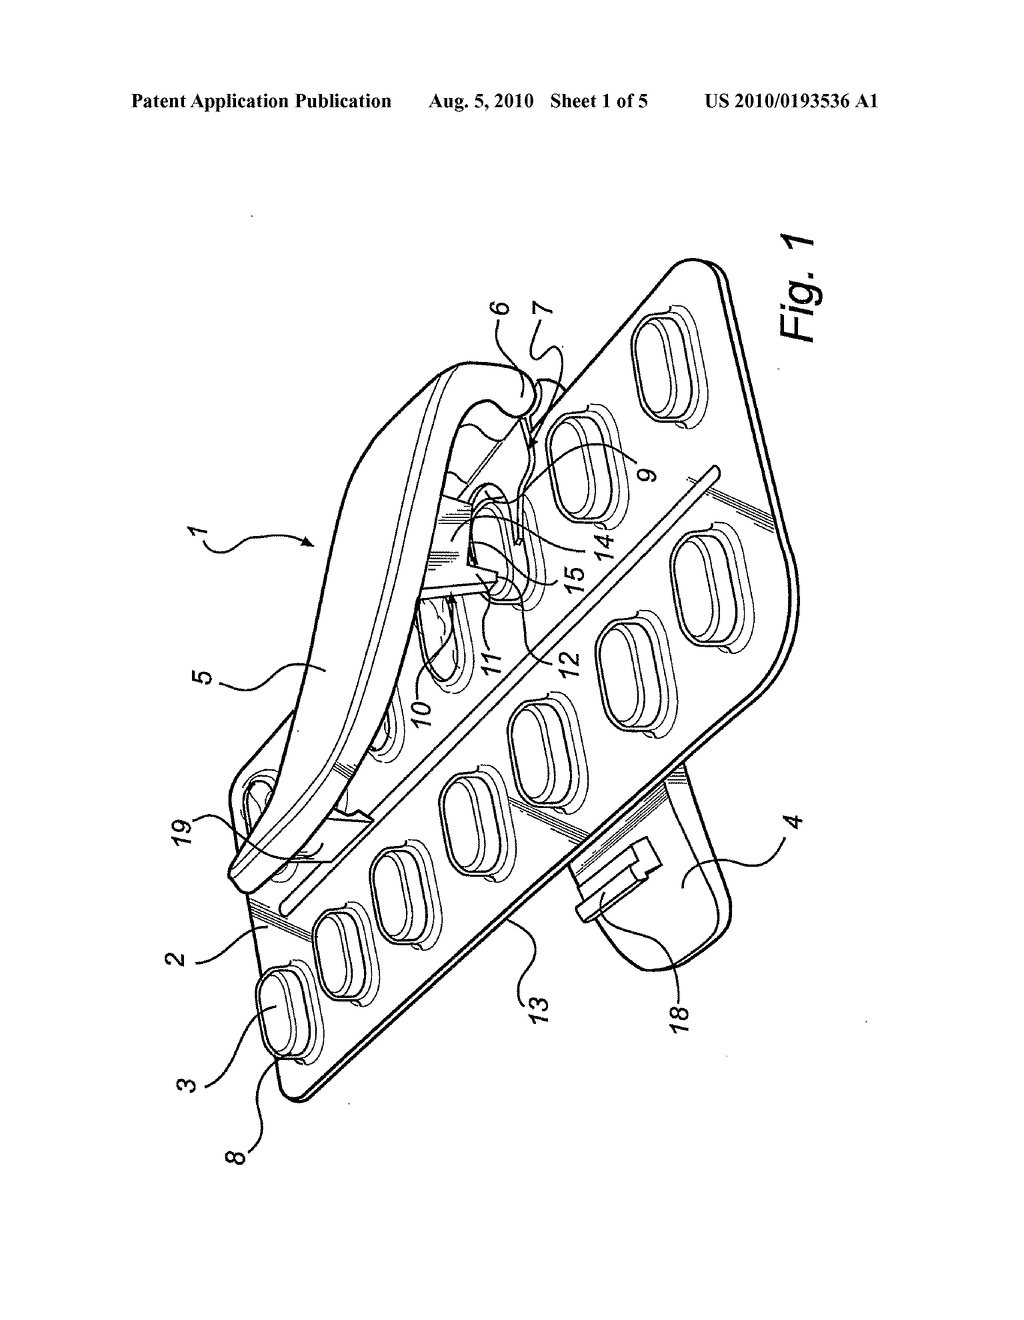  BLISTER PACK DEVICE AND A METHOD OF EJECTING A UNIT DOSAGE FROM A BLISTER PACK USING THE DEVICE - diagram, schematic, and image 02